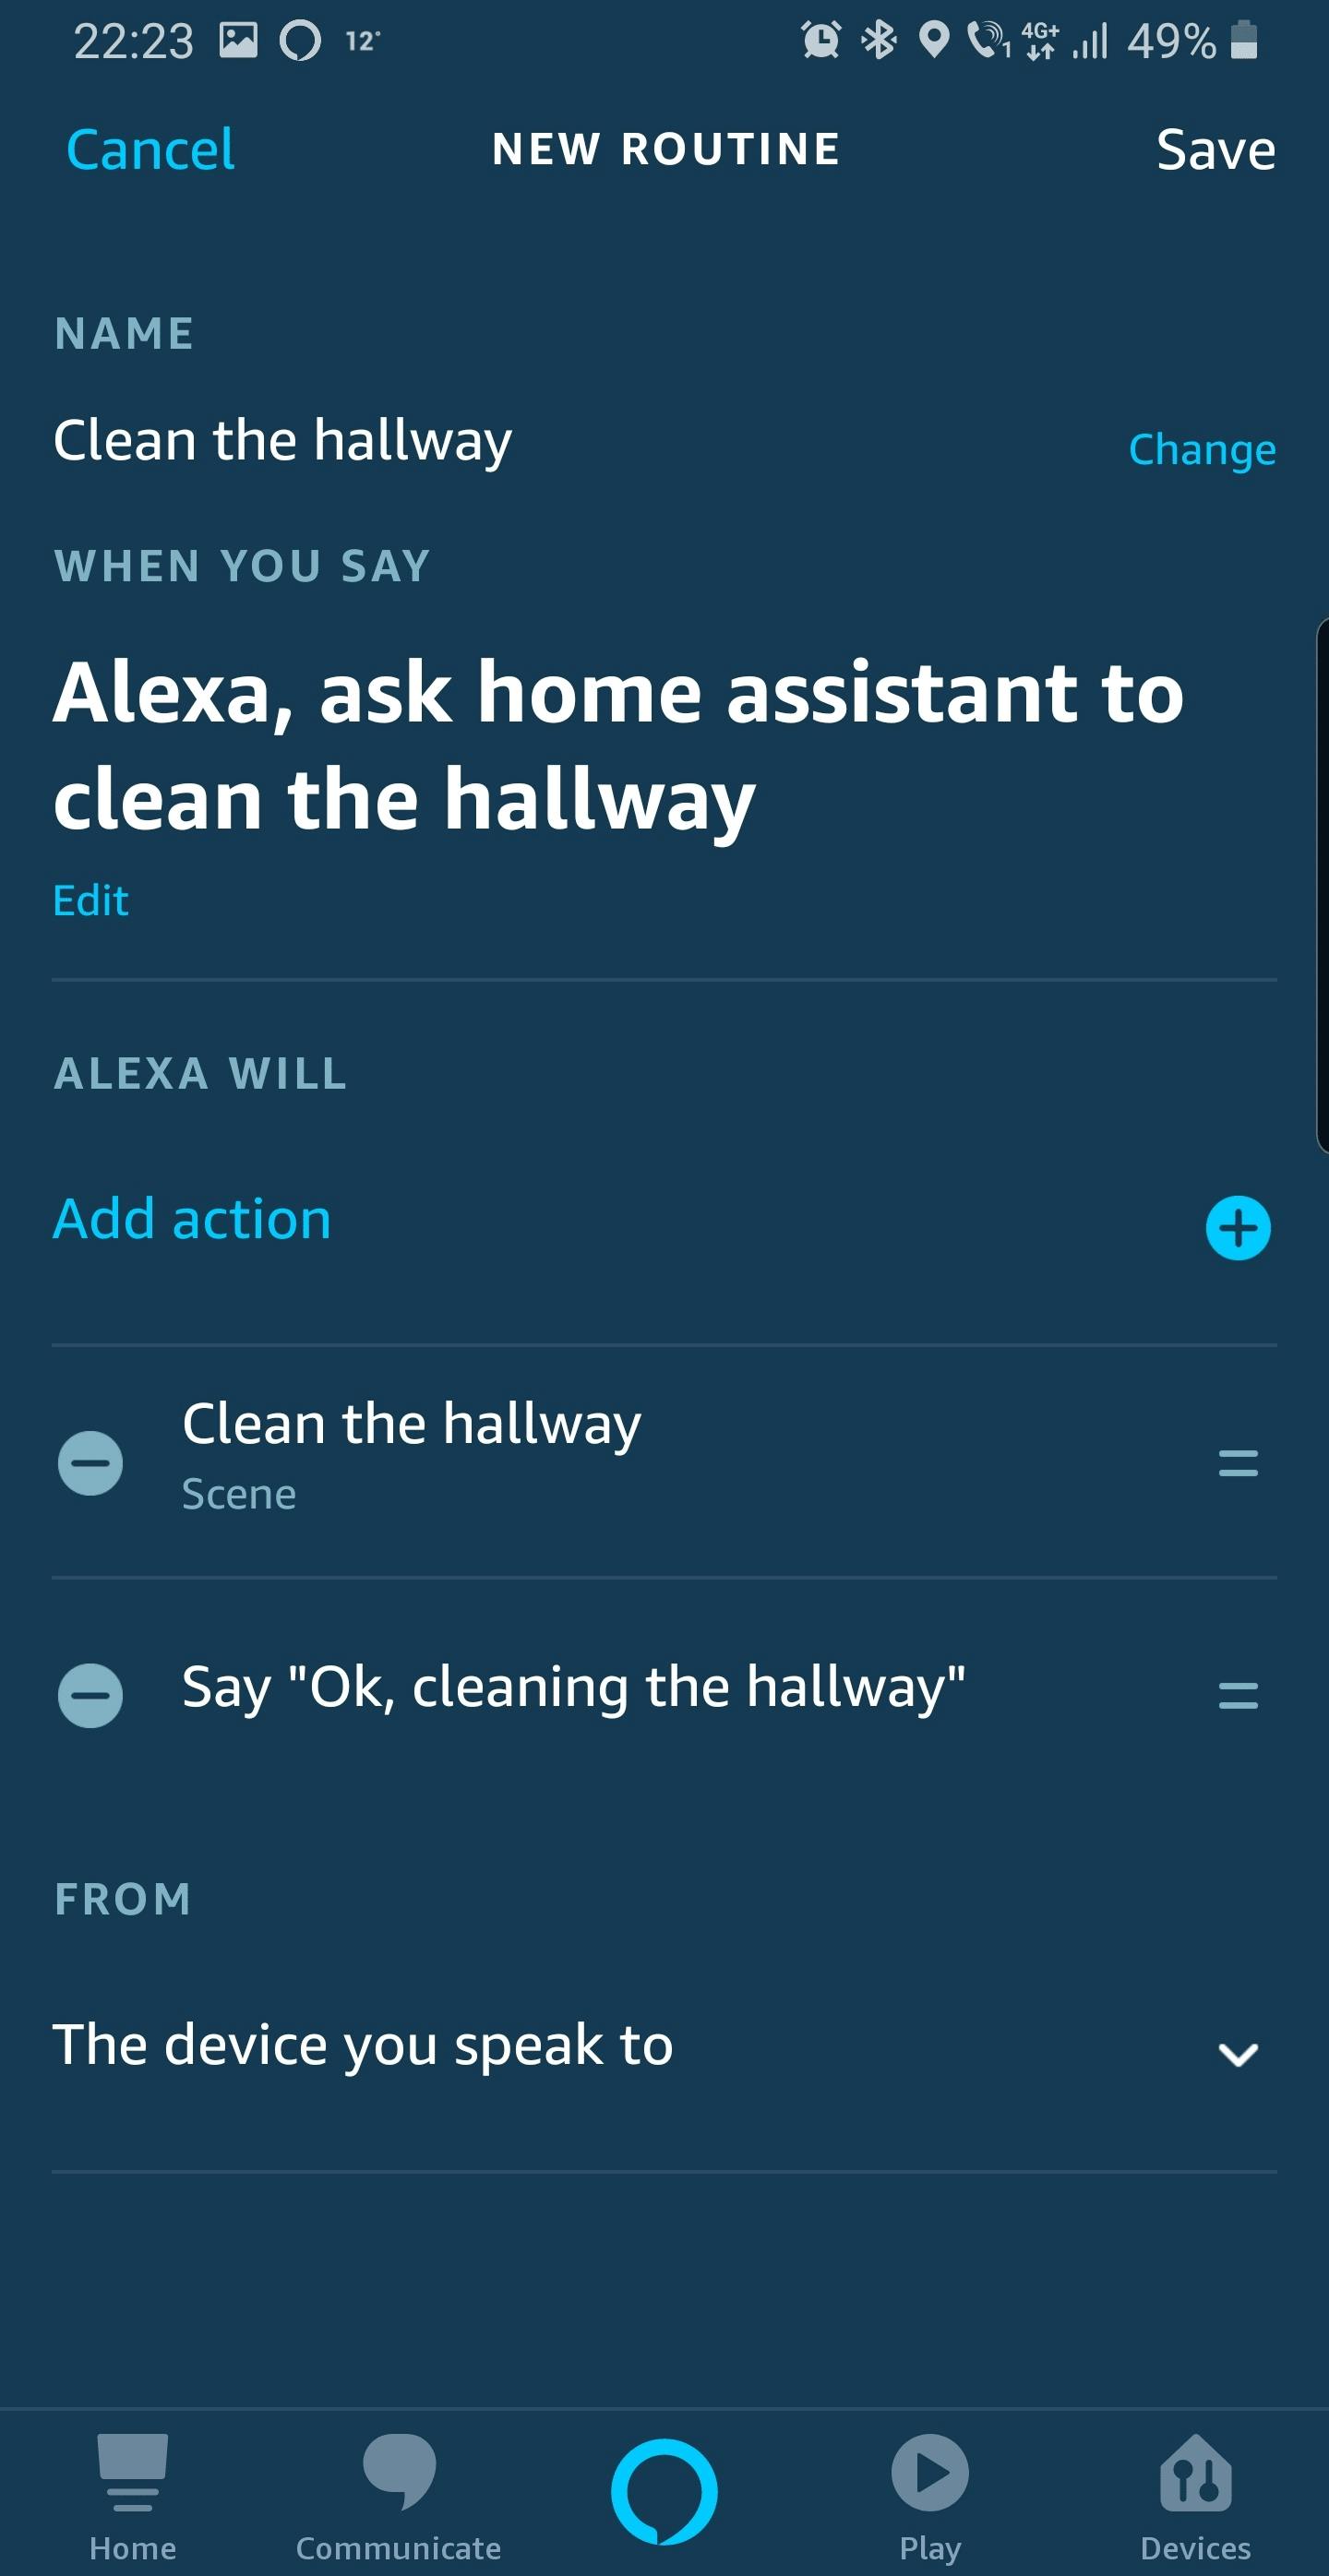 Overview of Alexa routine that integrates with Home Assistant